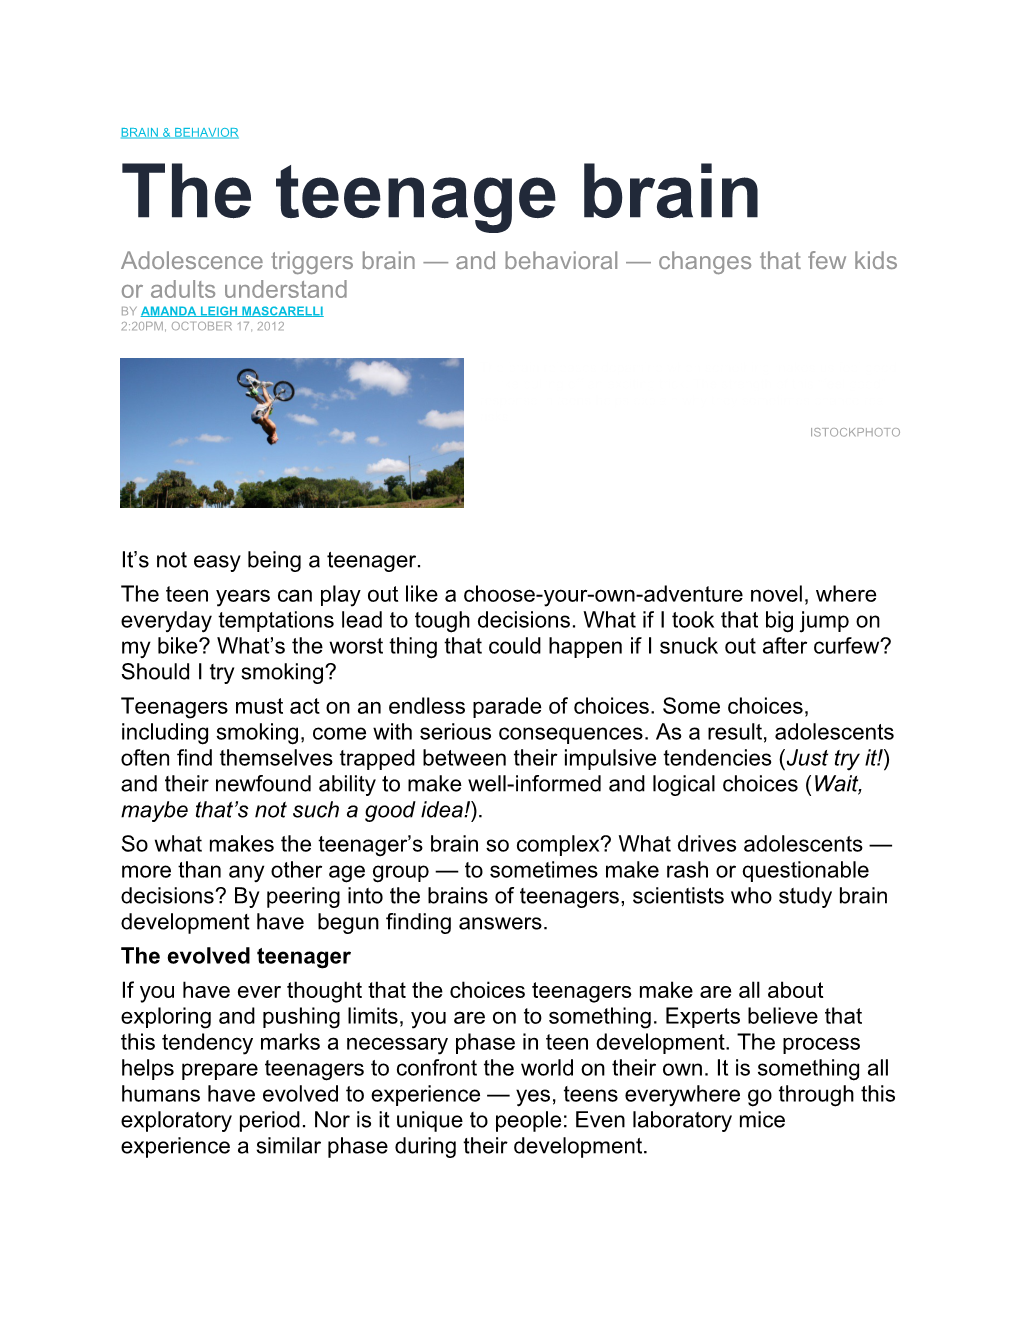 Adolescence Triggers Brain and Behavioral Changes That Few Kids Or Adults Understand